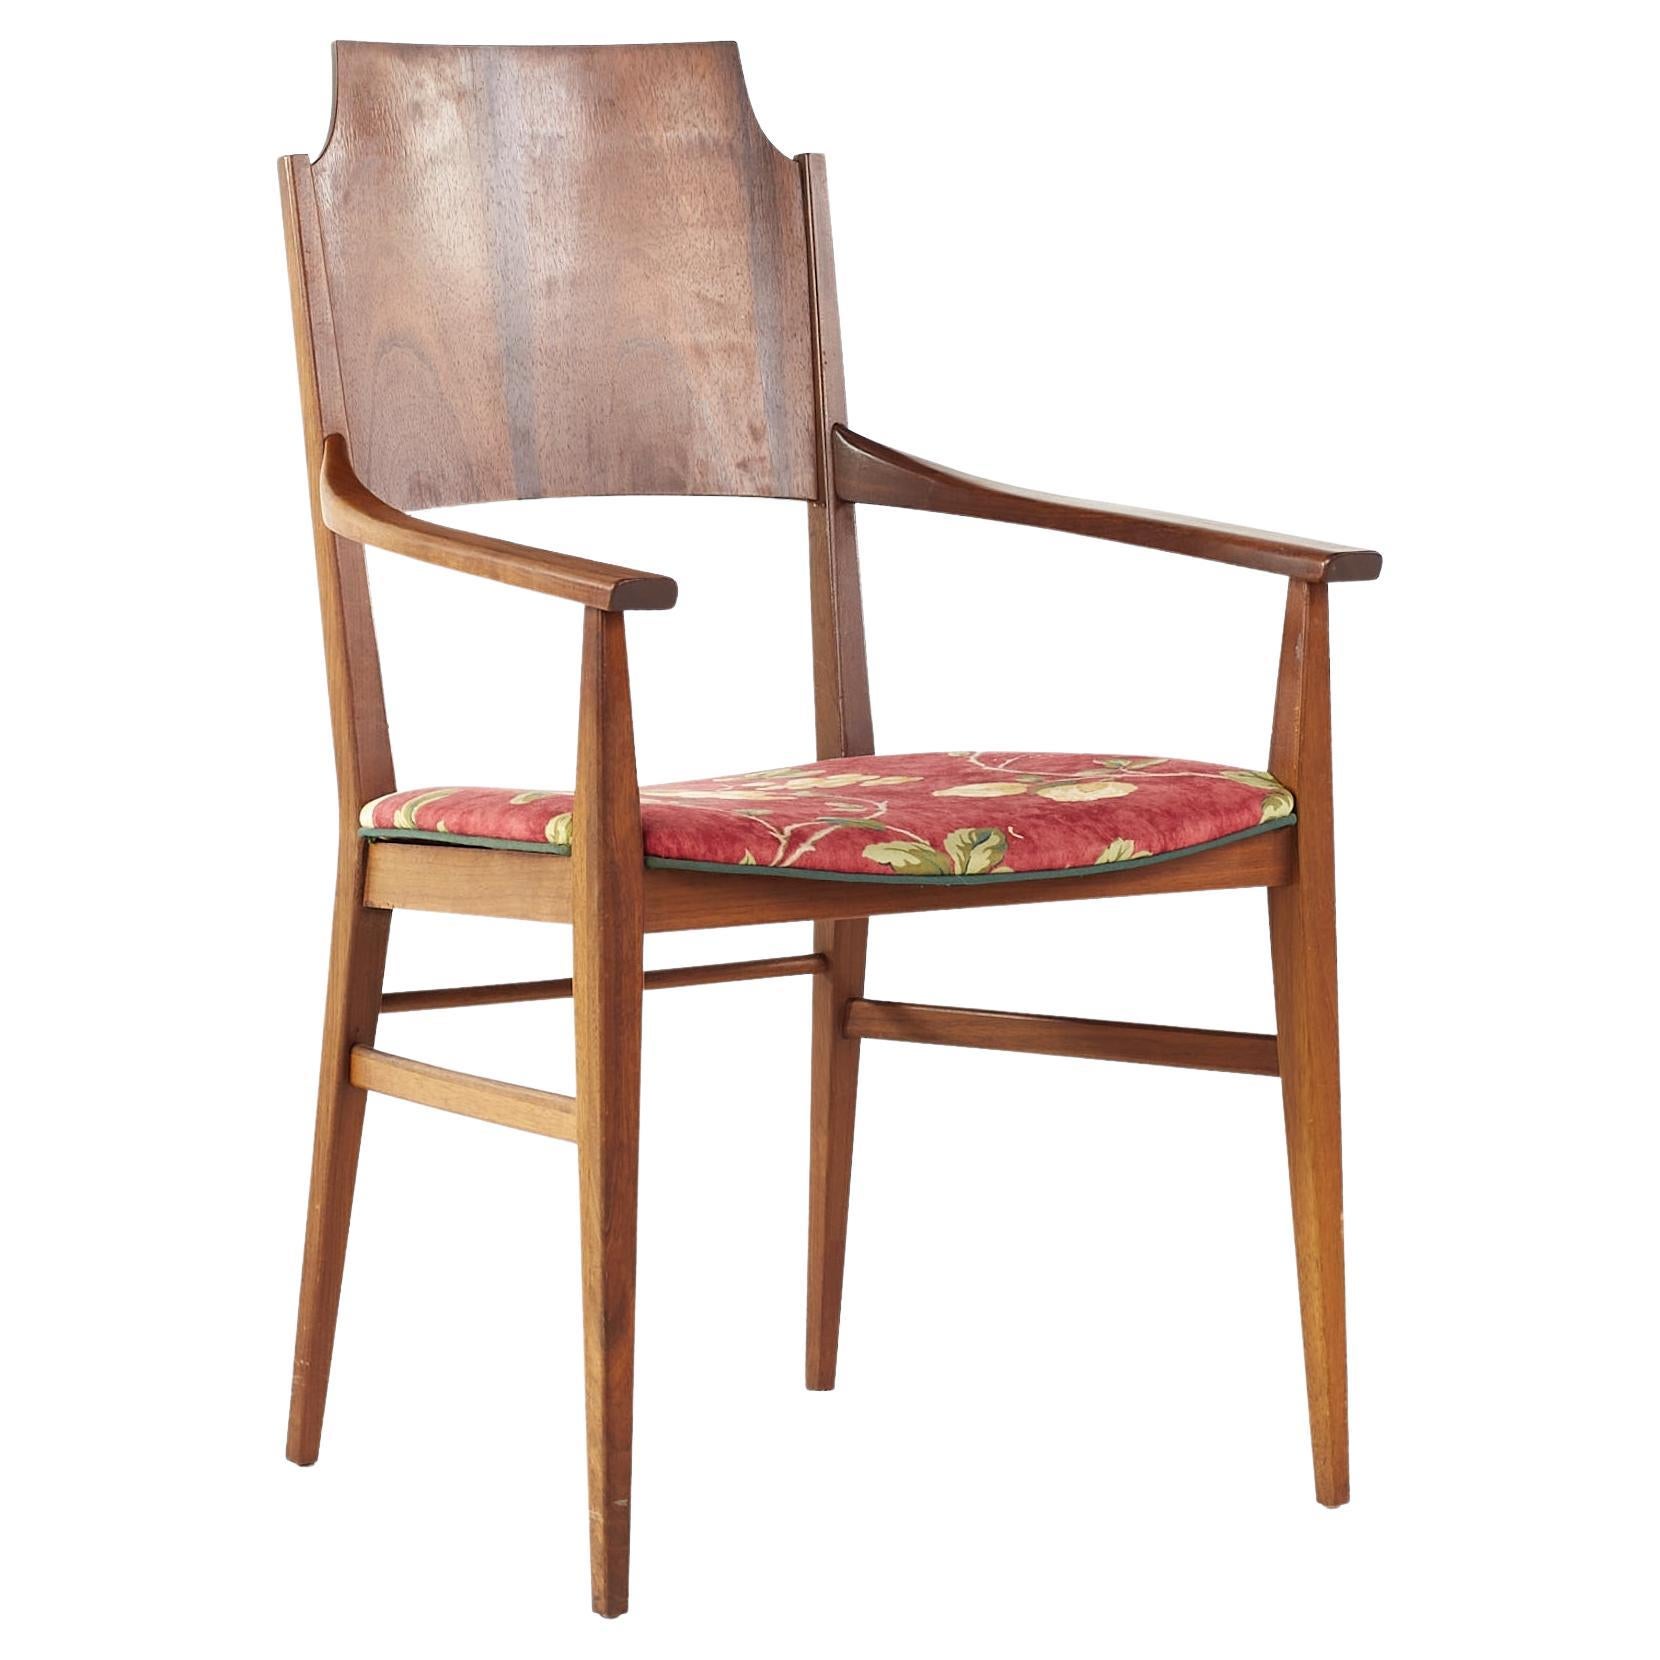 Paul McCobb for Lane Delineator Mid Century Rosewood Dining Chair